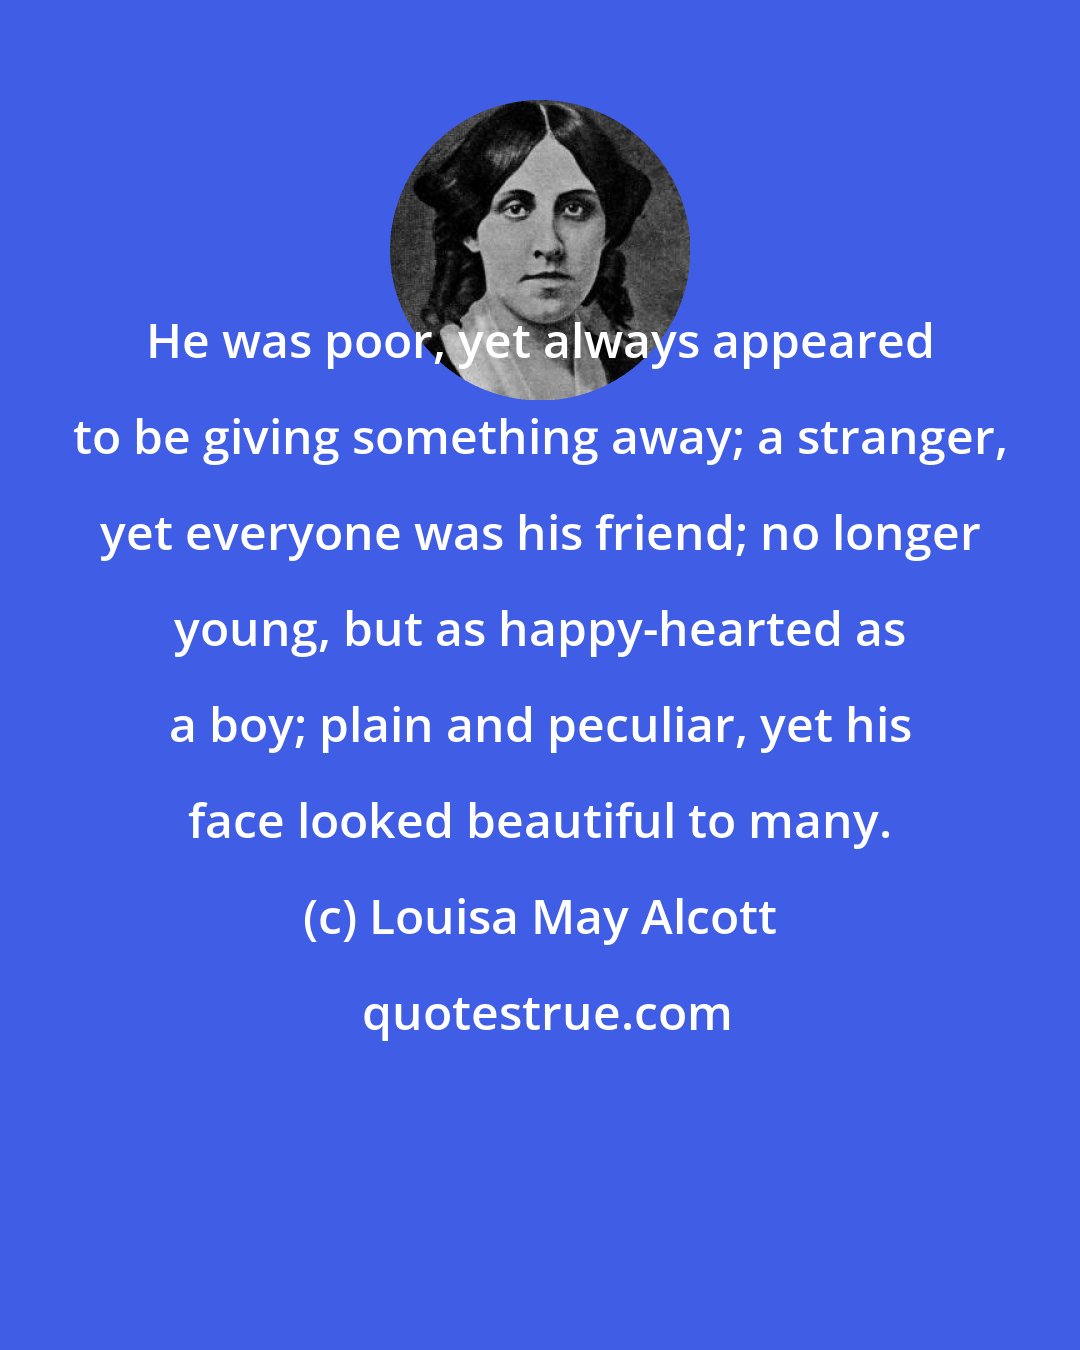 Louisa May Alcott: He was poor, yet always appeared to be giving something away; a stranger, yet everyone was his friend; no longer young, but as happy-hearted as a boy; plain and peculiar, yet his face looked beautiful to many.